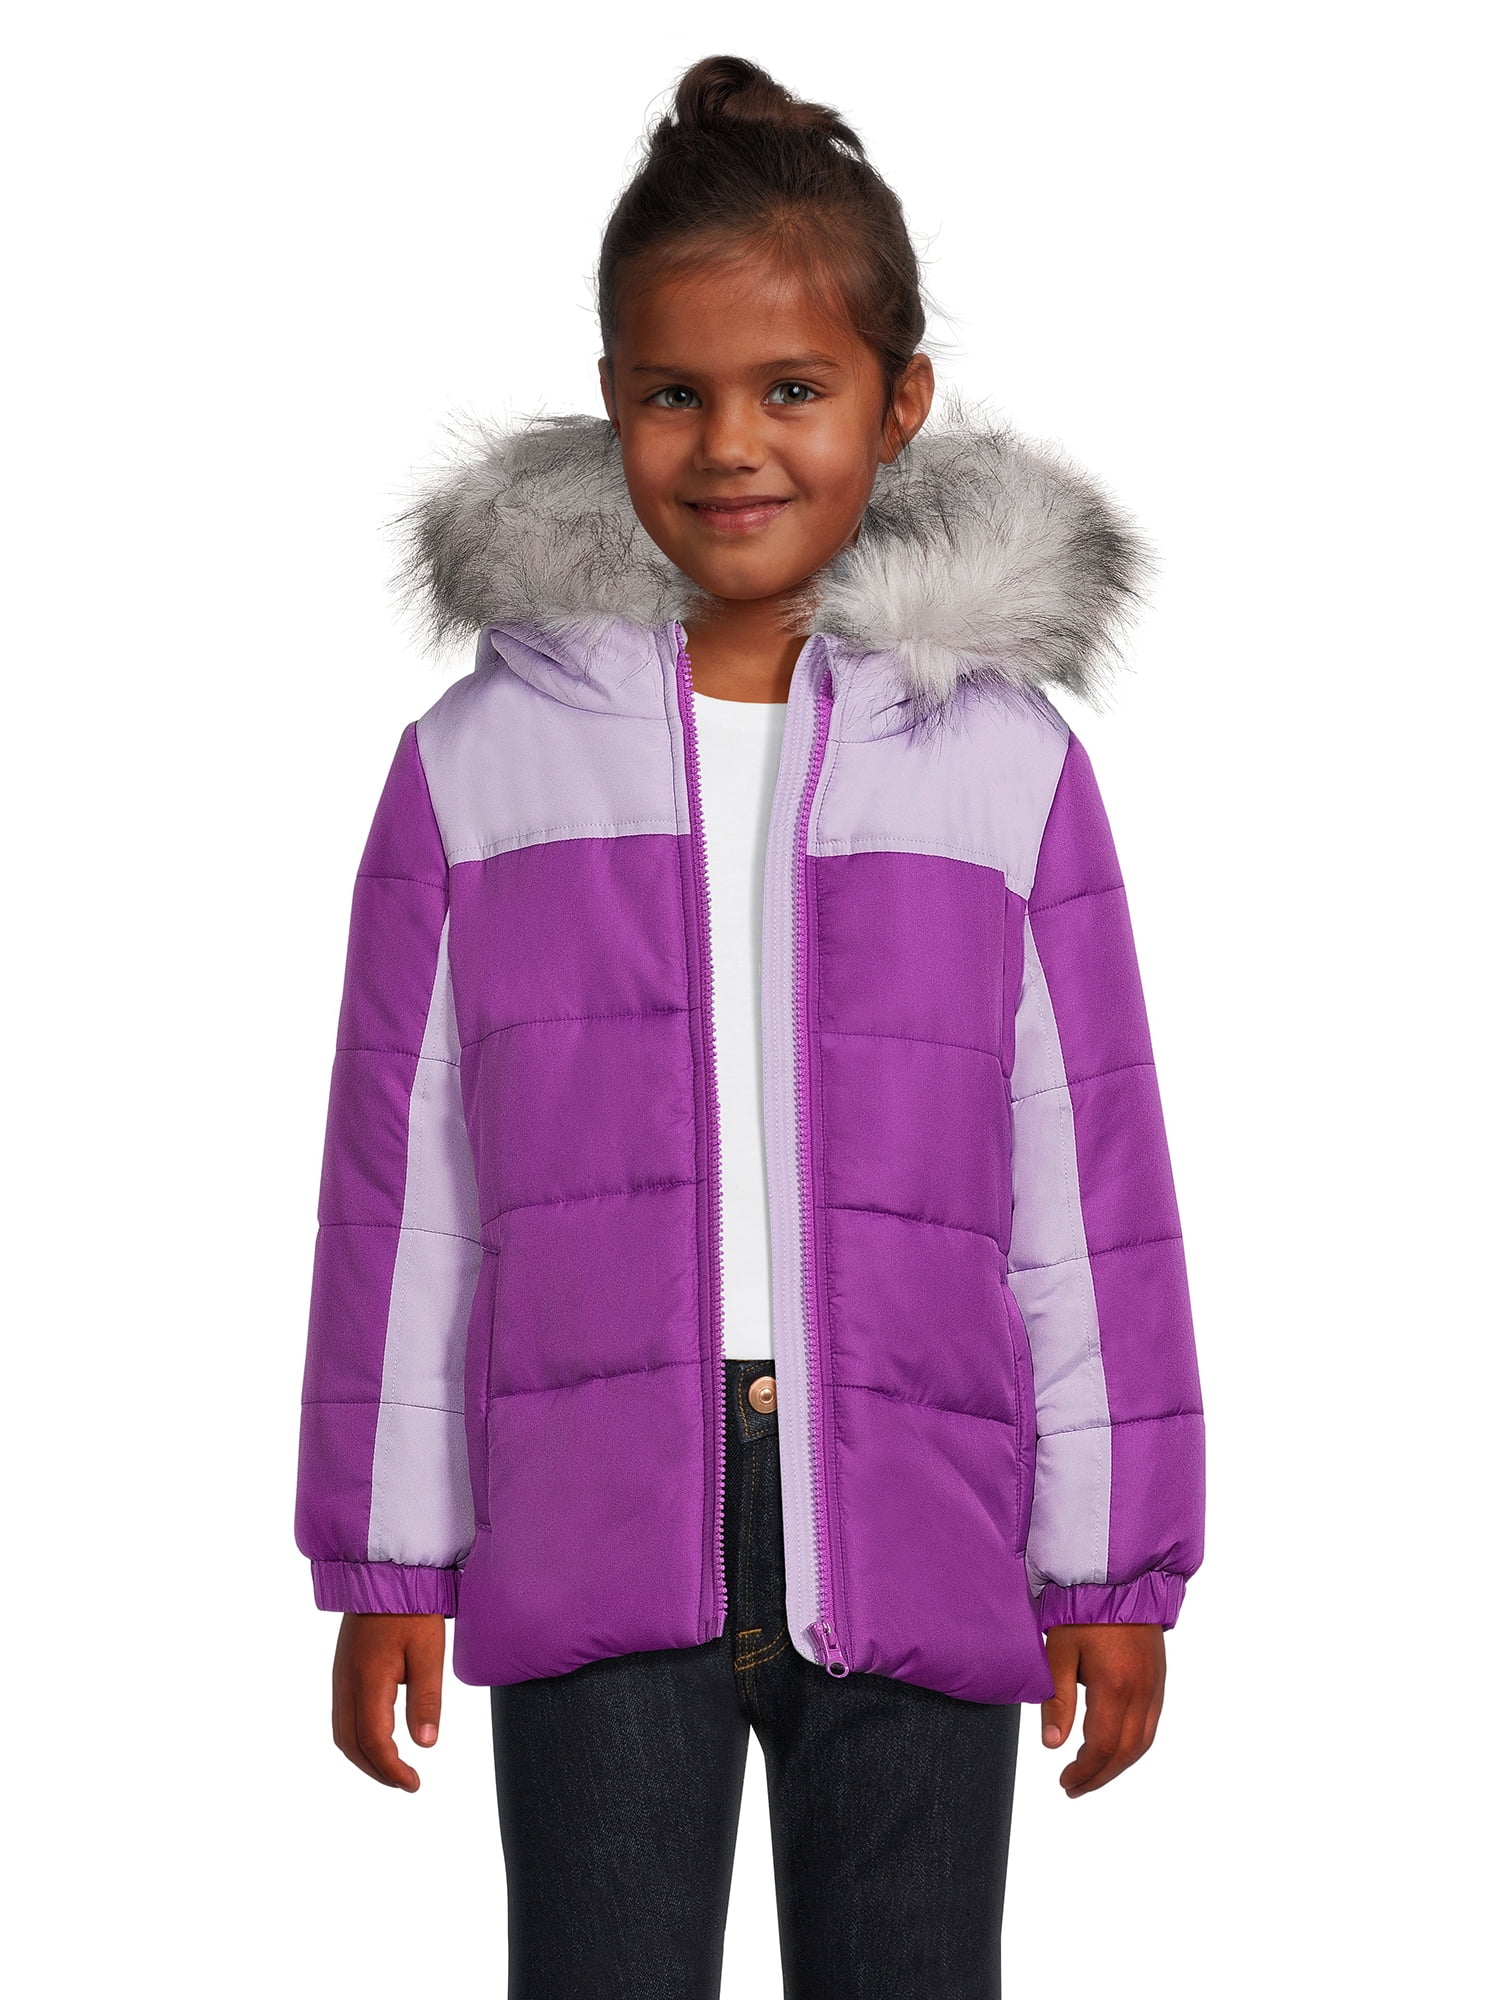 Weather Tamer Girls Hooded Long Sleeve Colorblocked Winter Puffer Coat ...